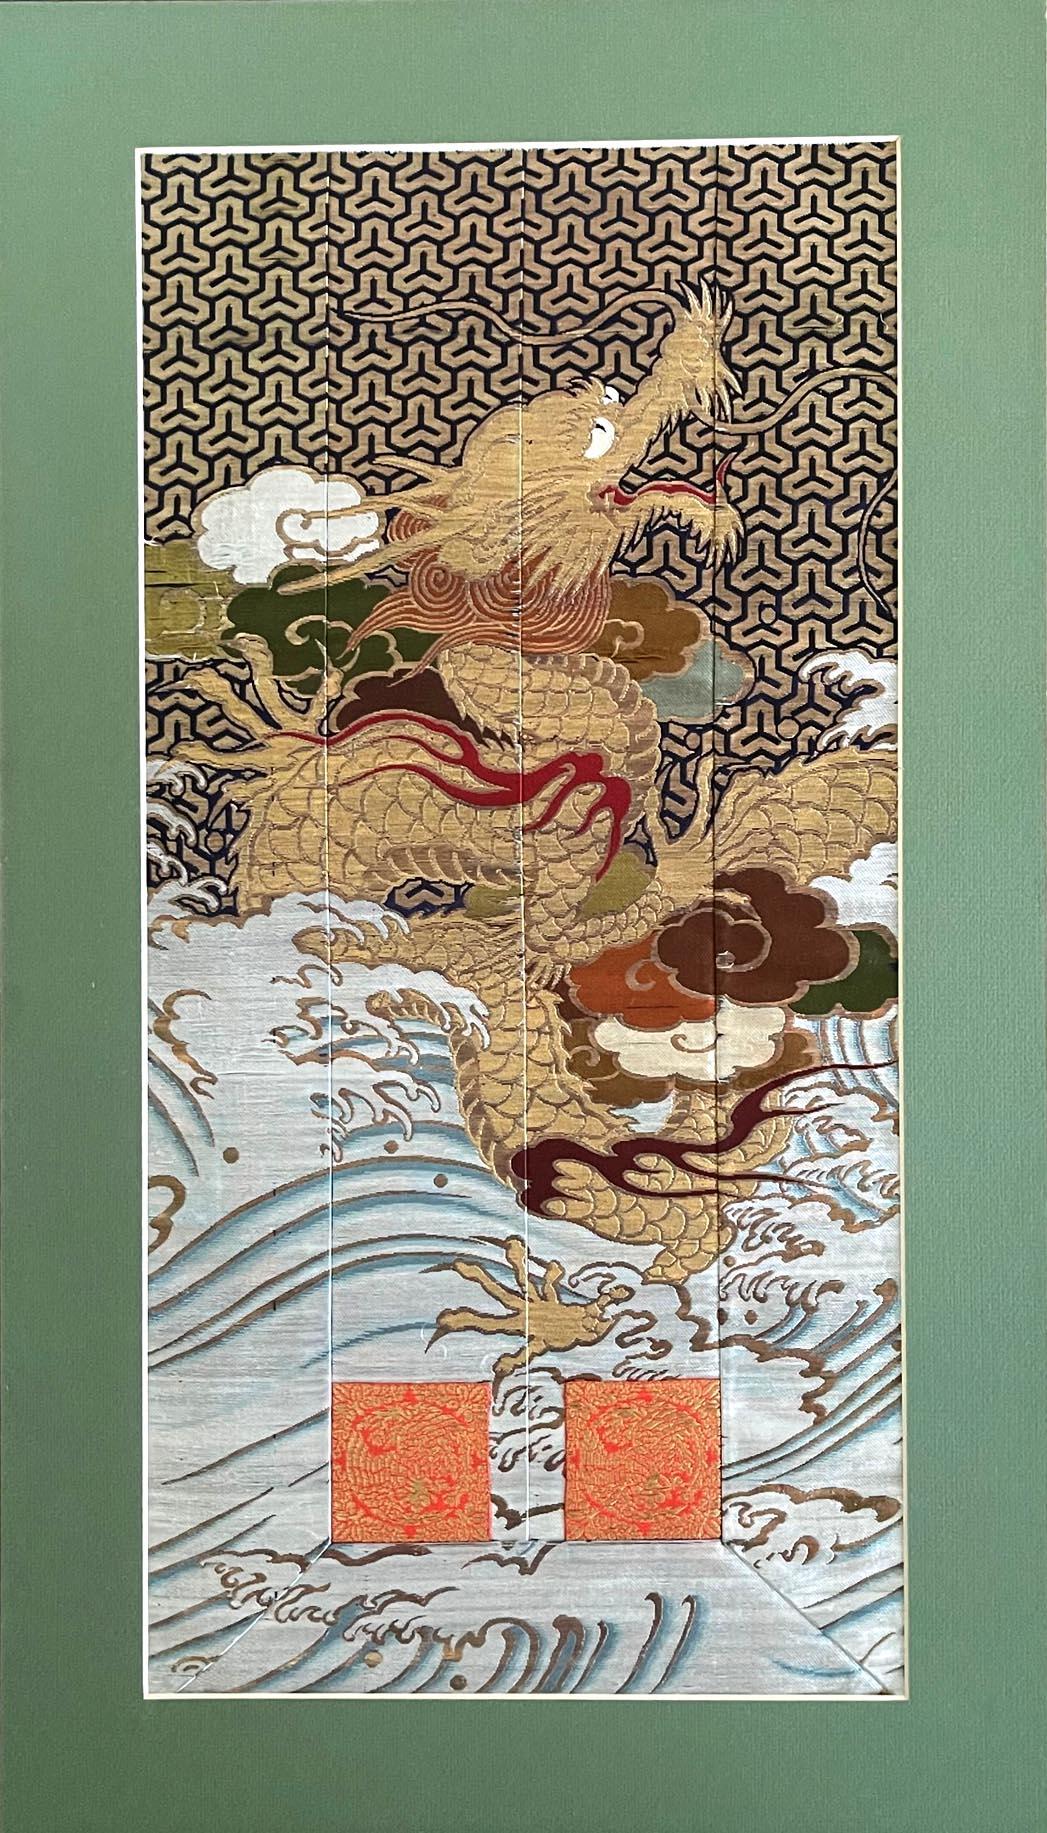 A framed Japanese woven textile circa late 19th century of Meiji Period. Likely a fragment of a priest robe or kesa, the multi-paneled textile was finely woven with gold foiled threads that depicts a five-clawed dragon slithering in the clouds and